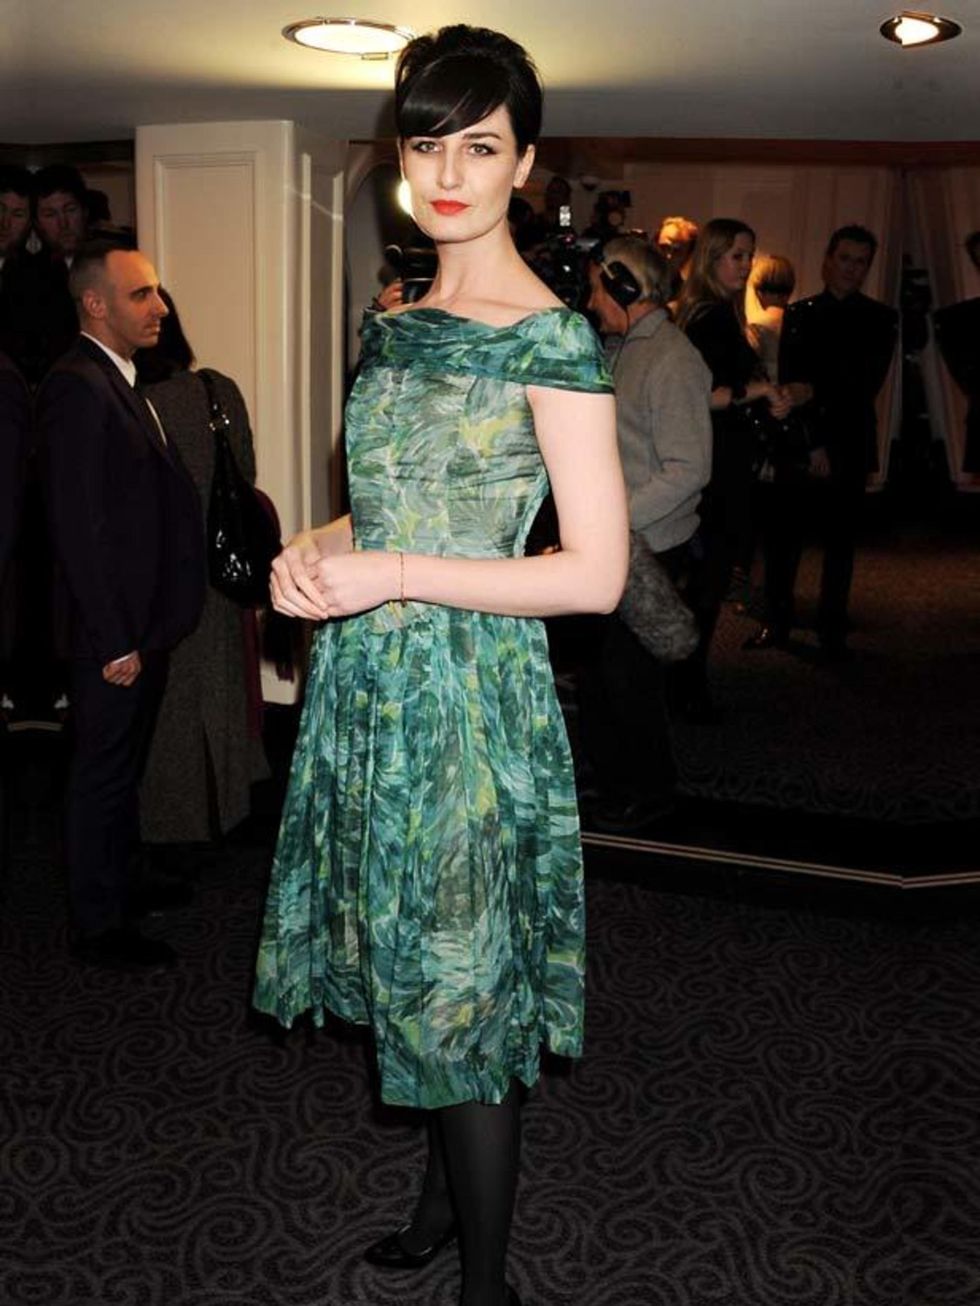 <p><a href="http://www.elleuk.com/starstyle/style-files/%28section%29/Erin-O-Connor/%28offset%29/0/%28img%29/155017">Erin O'Connor</a> attends the  British Fashion Awards at The Savoy London, 7 December 2010</p>